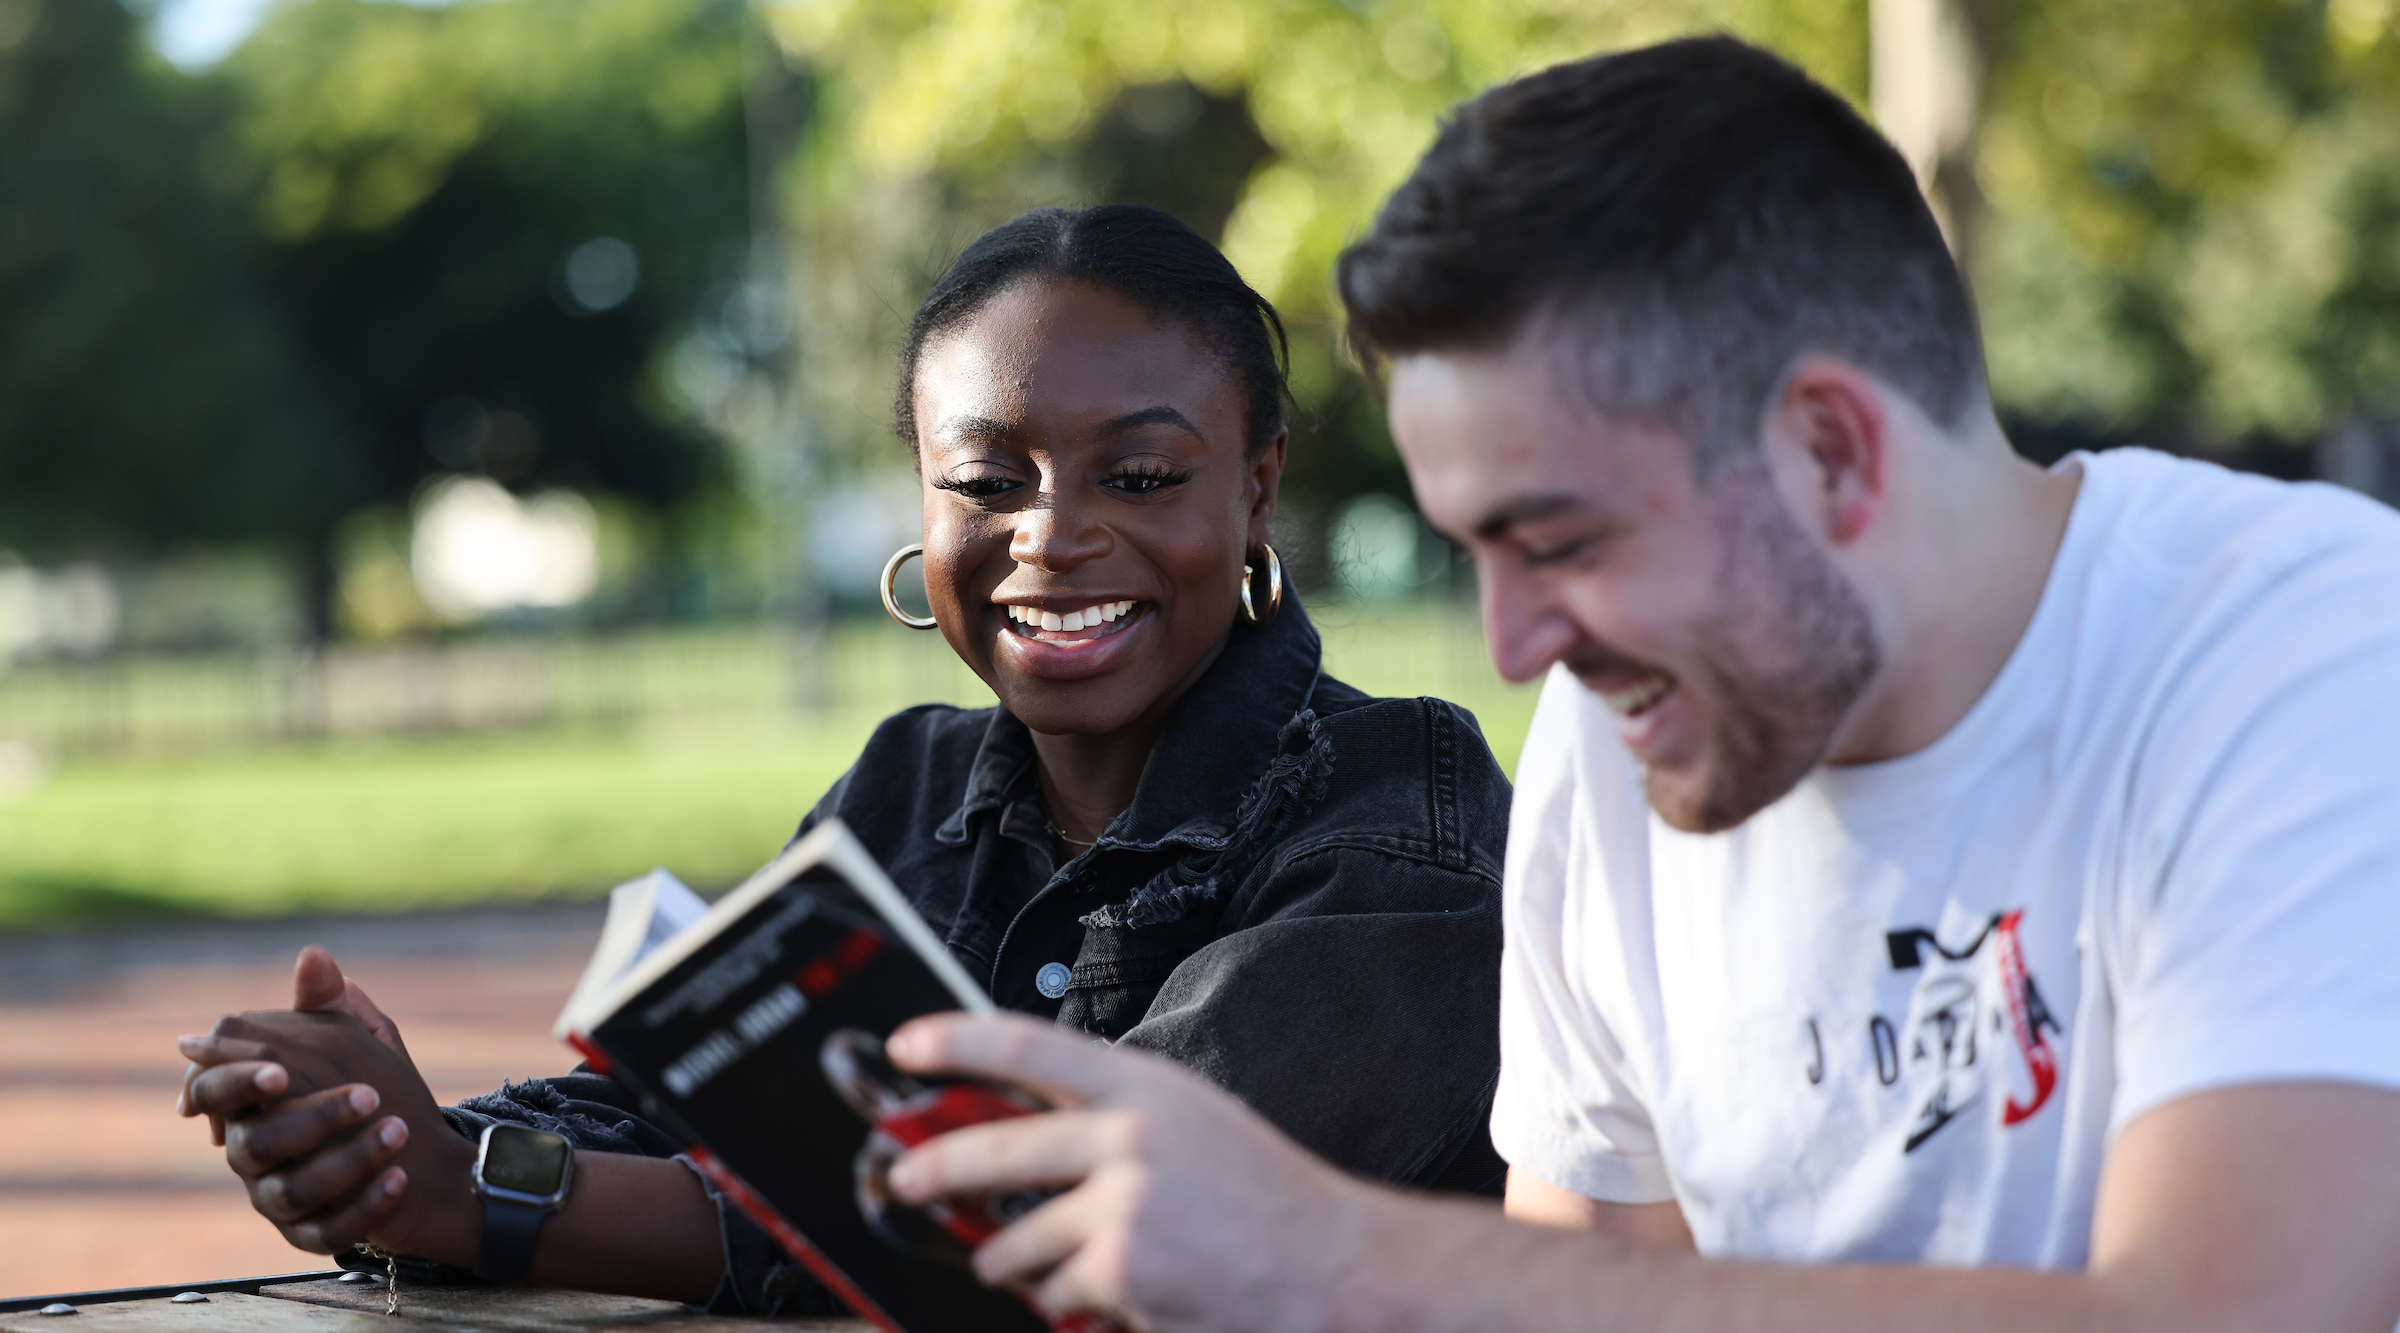 Two Suffolk Students read a book and chat in a city park at a picnic table.